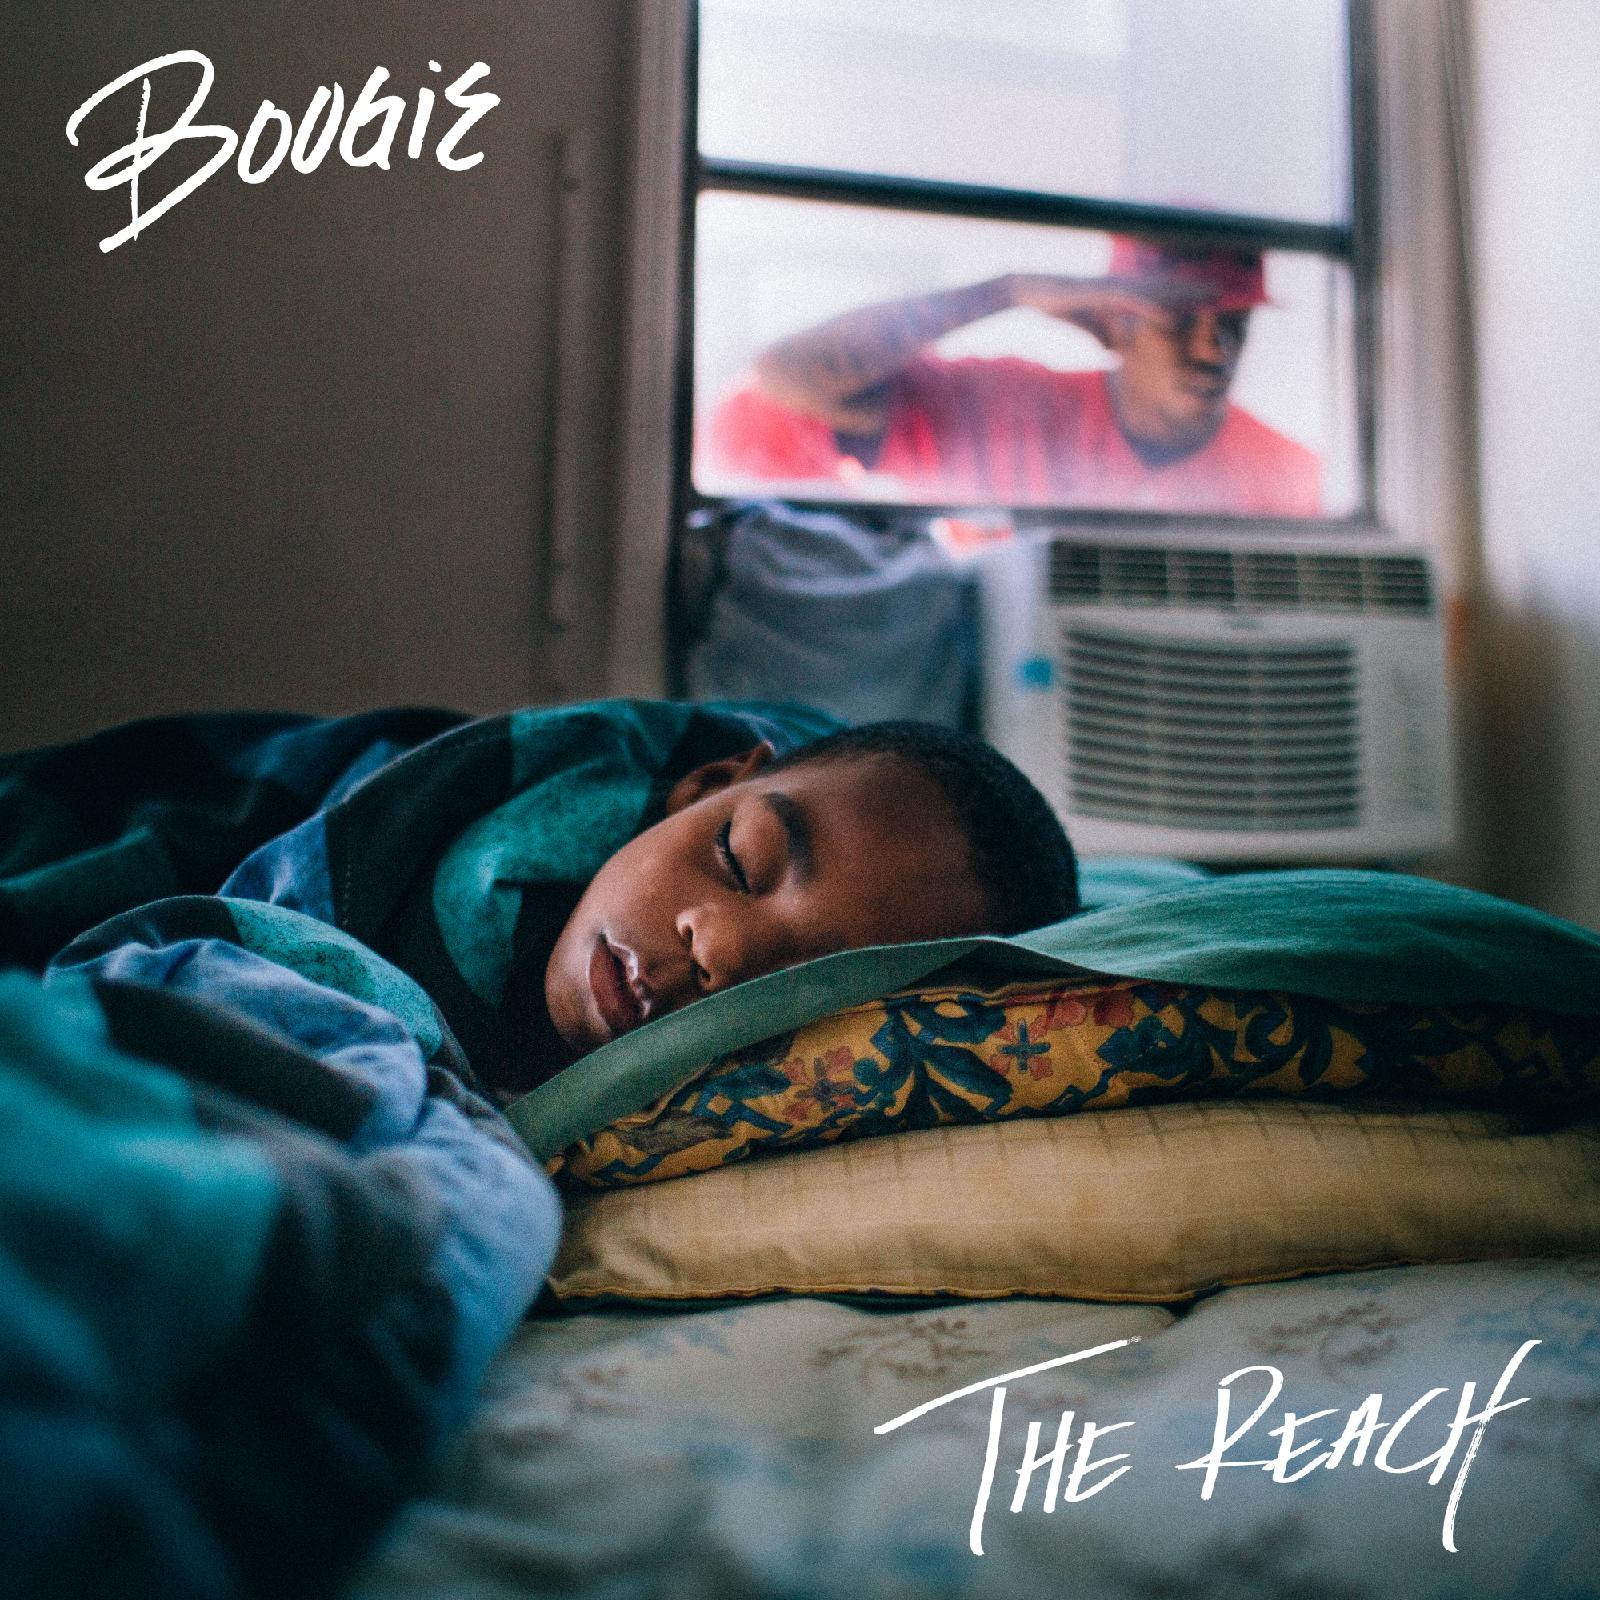 Album Review: The Reach by Boogie